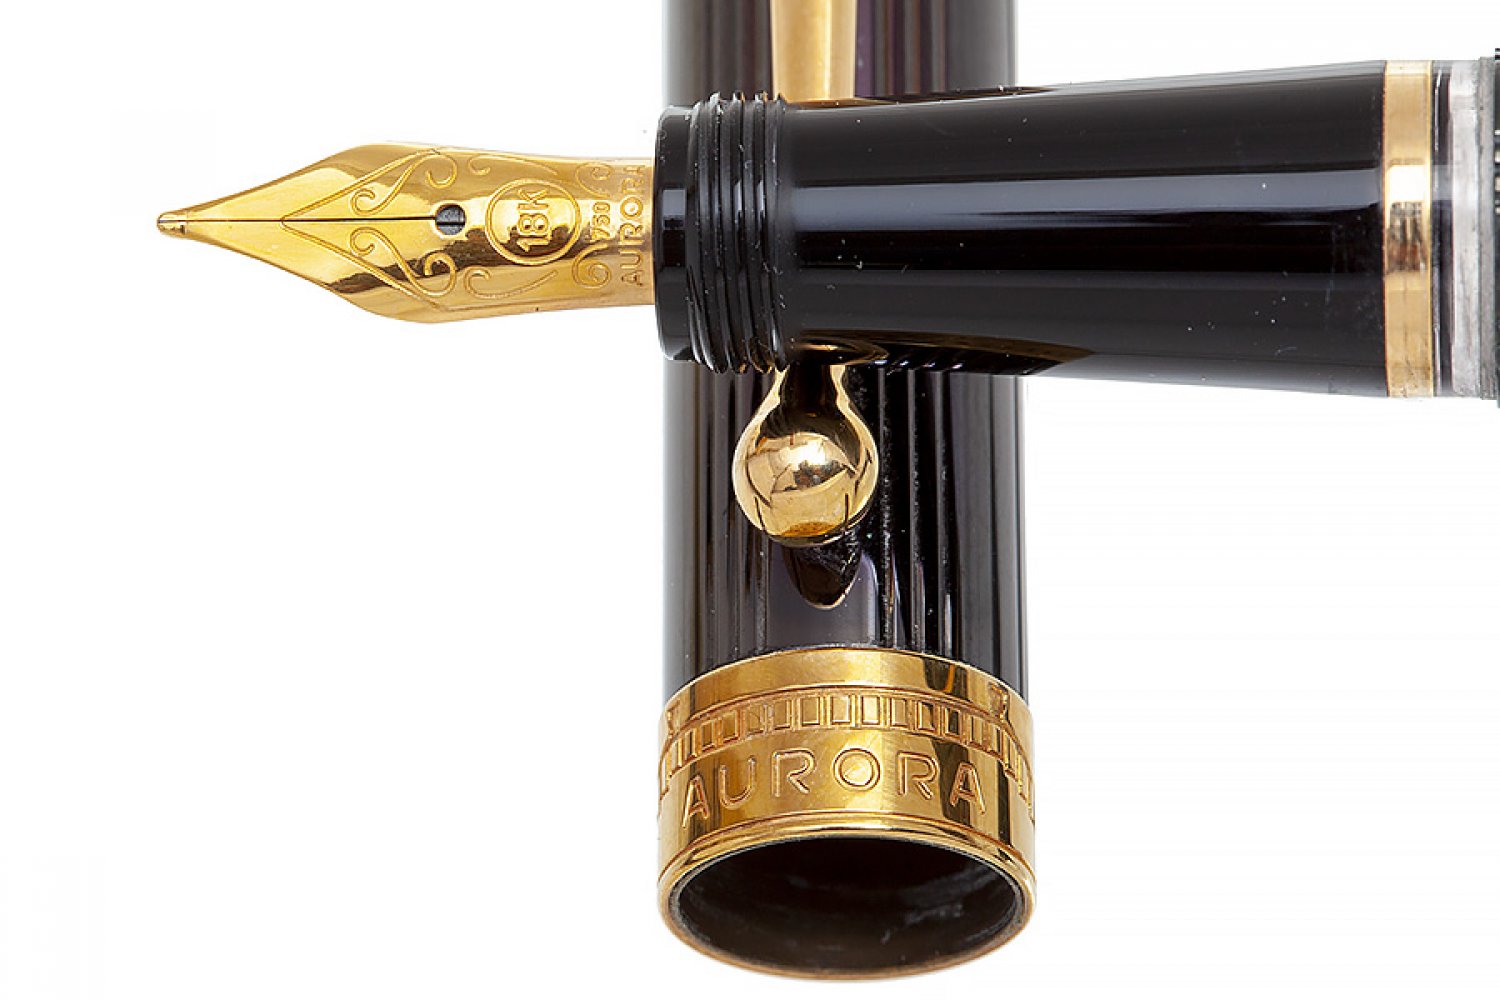 AURORA "PALLADIO" FOUNTAIN PEN.Black resin barrel and rose gold details.Limited edition. Exemplary - Image 3 of 3